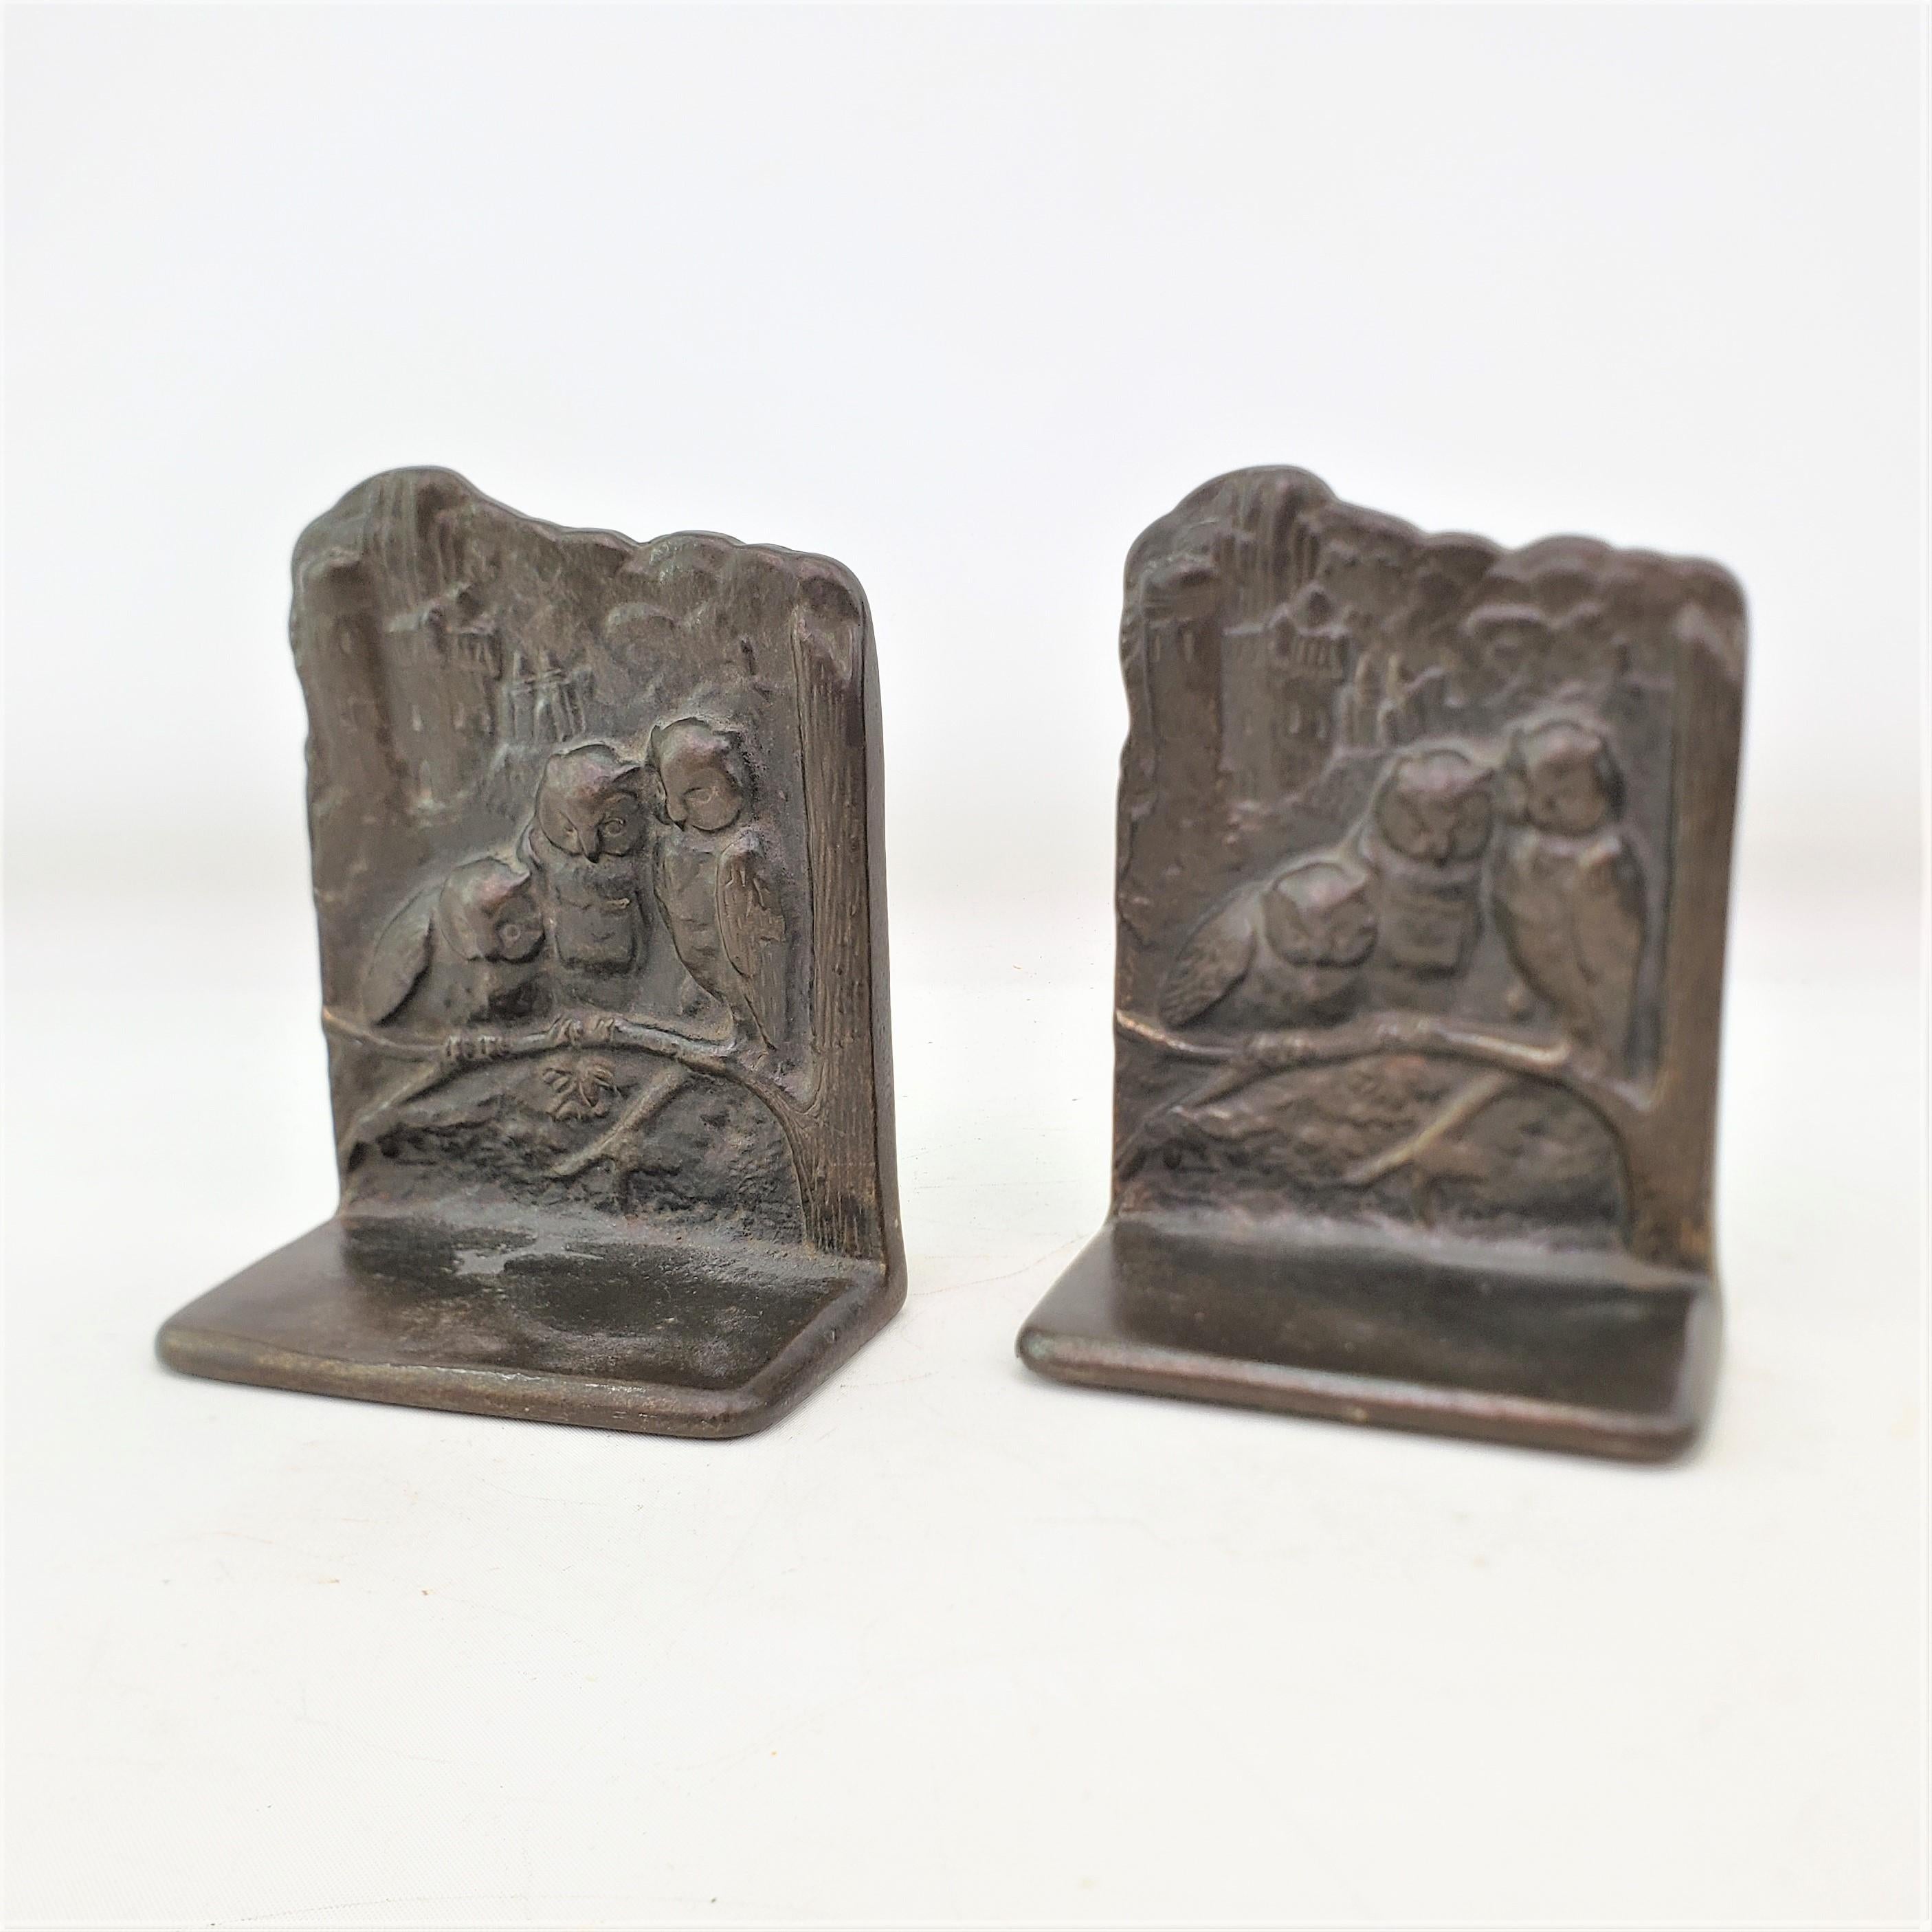 American Antique Art Deco Cast & Patinated Bookends Depicting Three Perched Owls For Sale